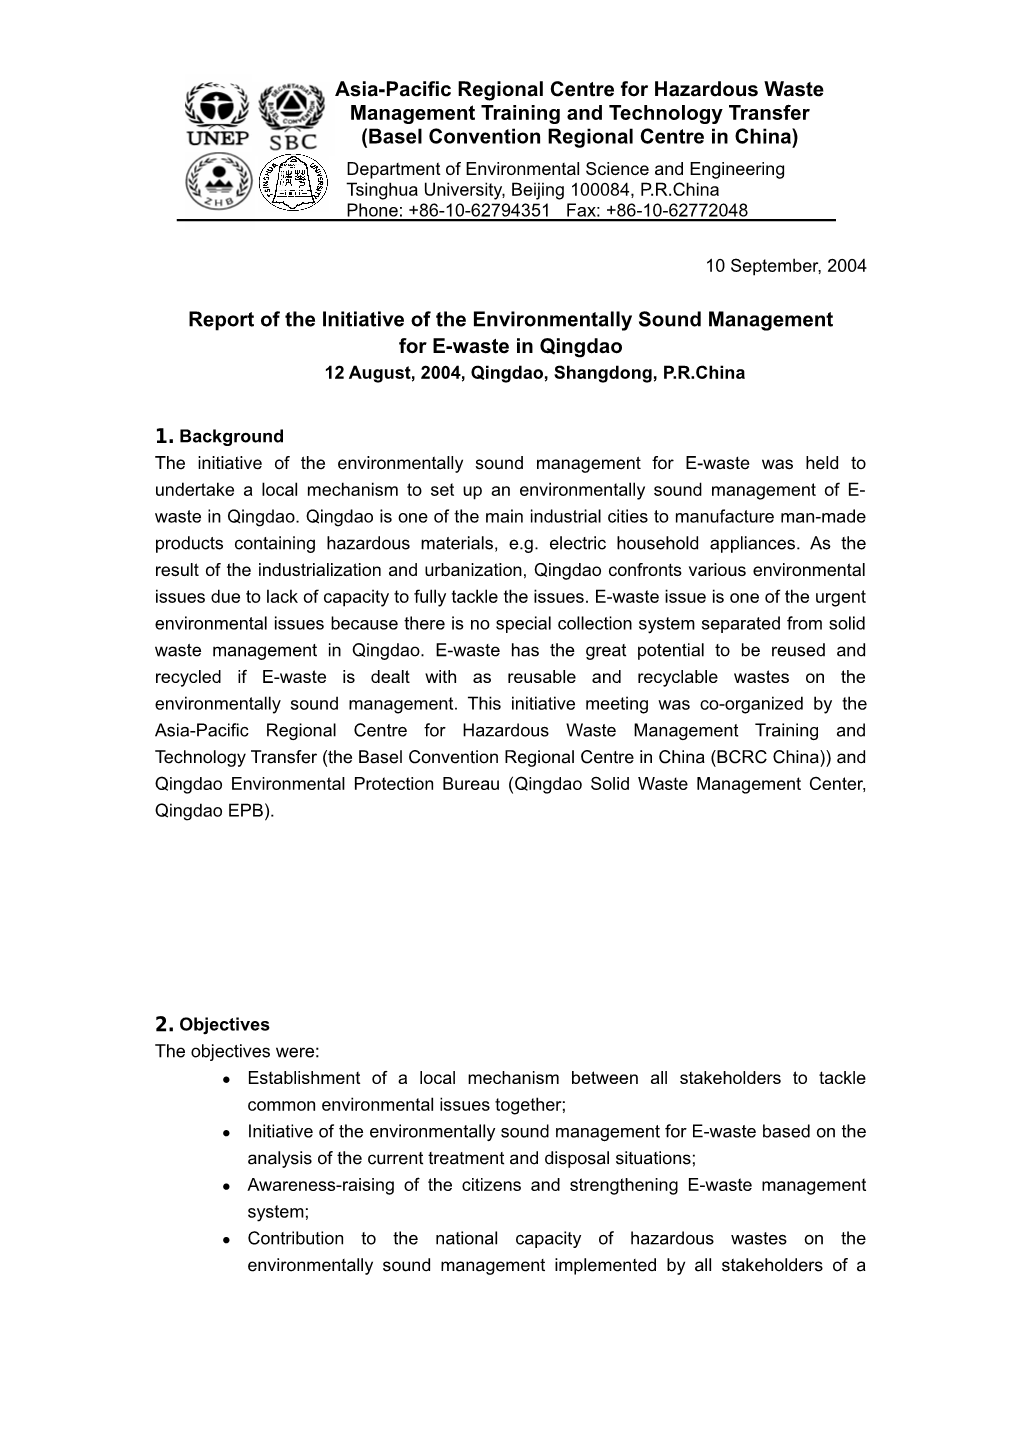 Report of T He Initiative of the Environmentally Sound Management for E-Waste in Qingdao